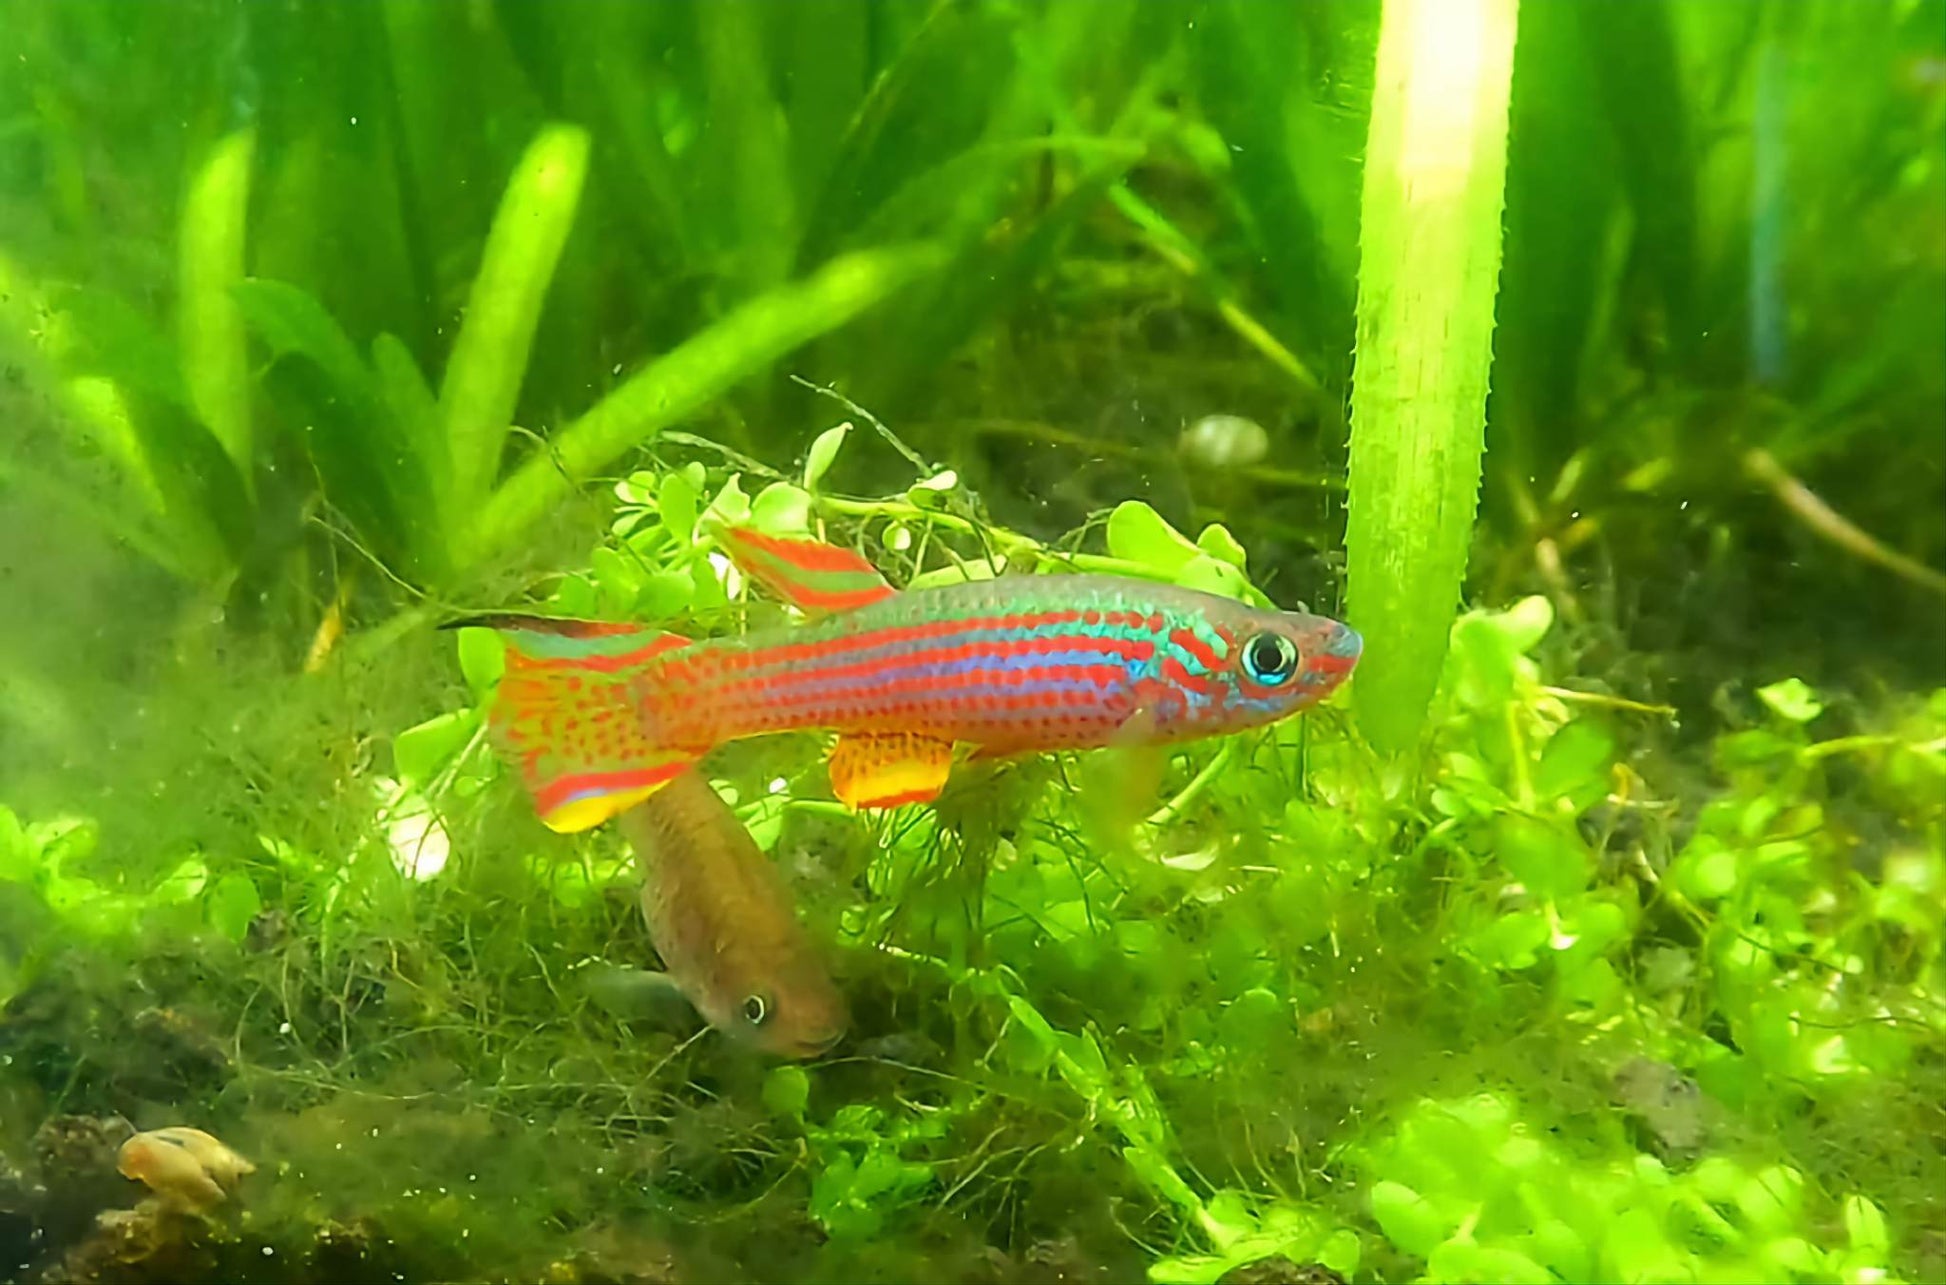 A vivid Aphyosemion striatum Lambaréné, or Red Striped Killifish, swimming in a lushly planted aquarium. The killi's iridescent blue body with striking red stripes and dots stands out against the green backdrop of aquatic plants and moss, creating a dynamic and natural underwater scene.